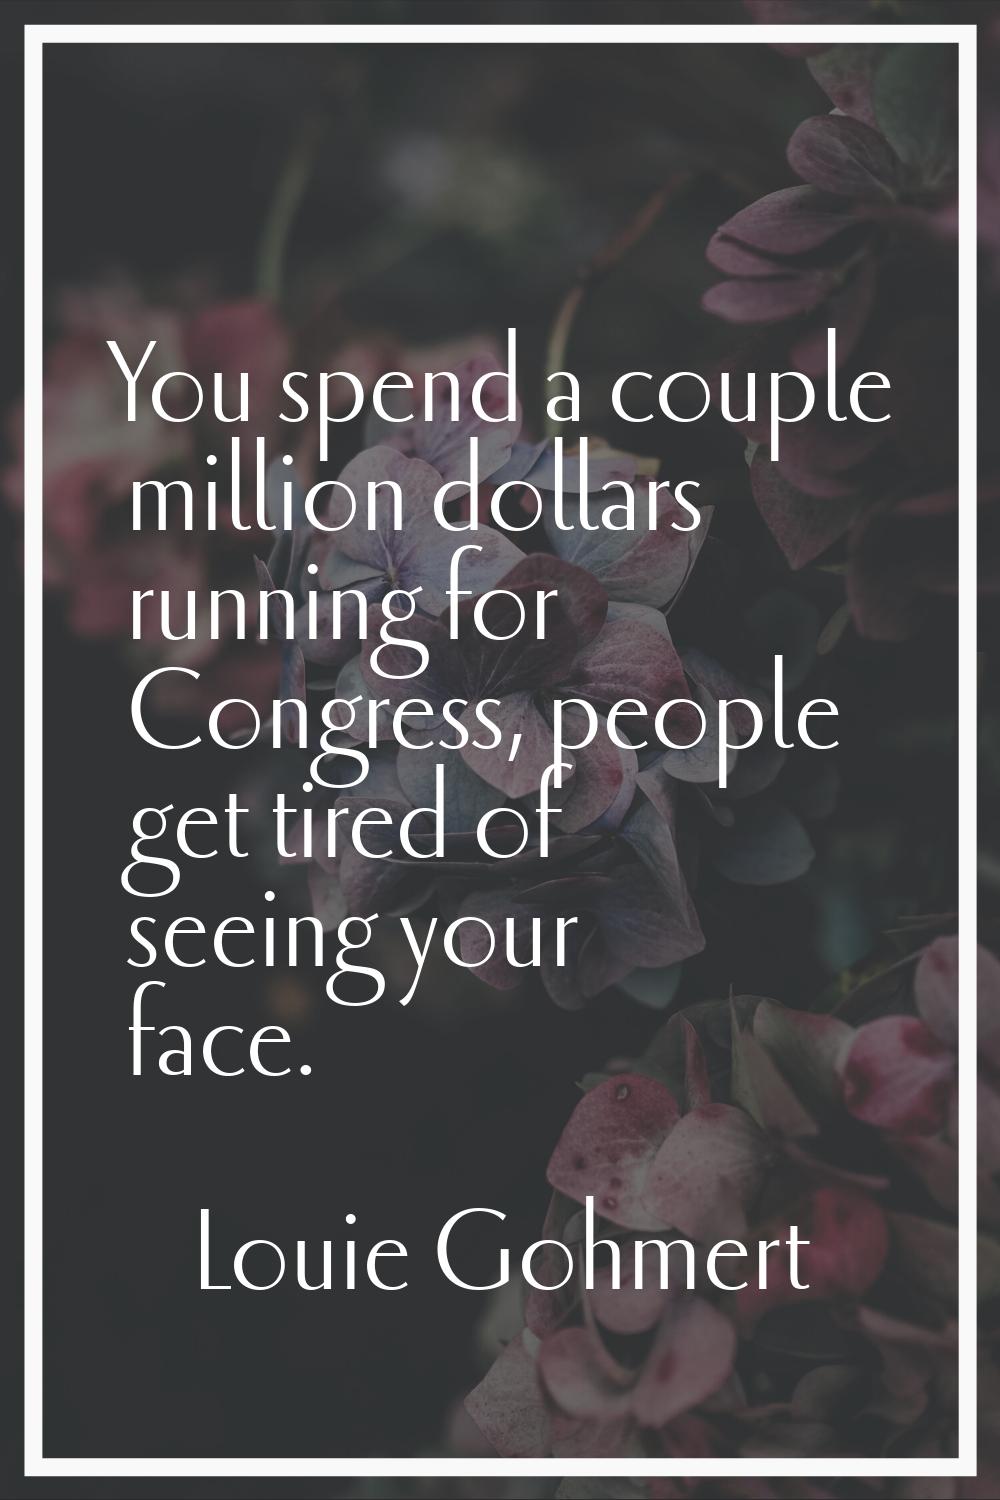 You spend a couple million dollars running for Congress, people get tired of seeing your face.